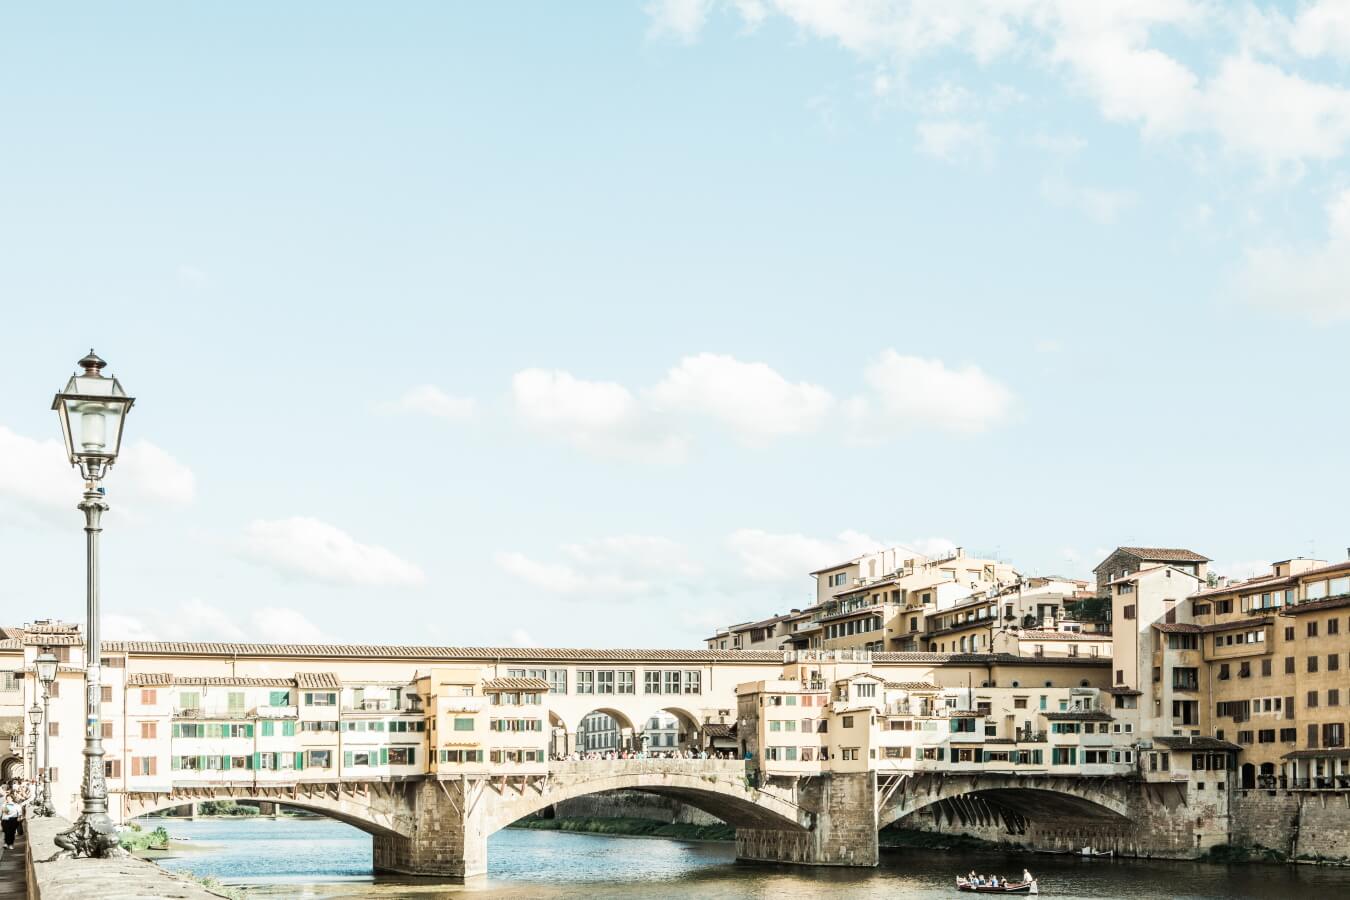 Ponte Vecchio, the icon of Florence, for a beautiful destination wedding in Florence